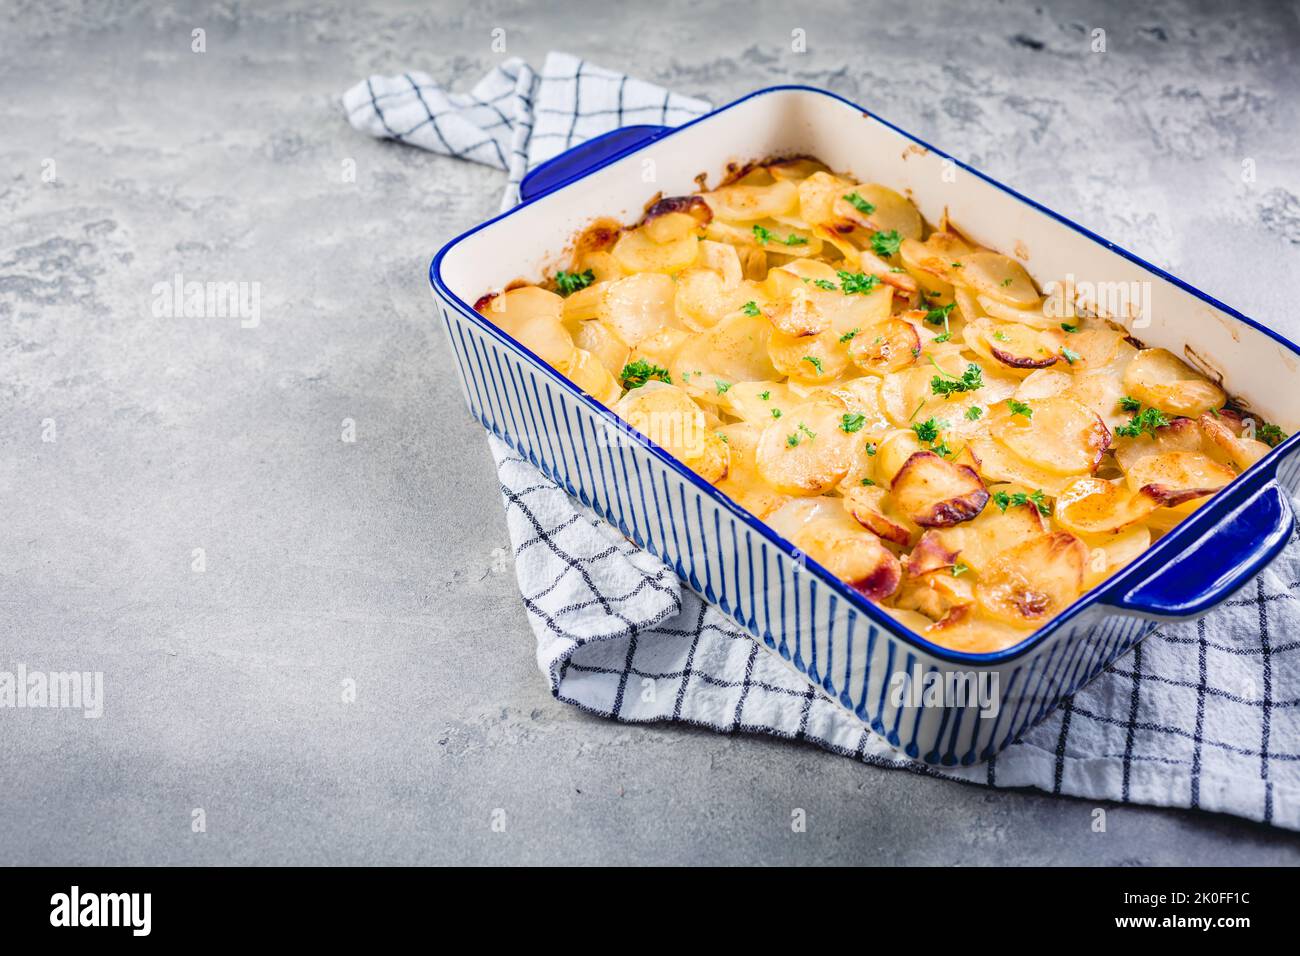 Potato casserole with onions and eggs. Vegetarian meal. Stock Photo